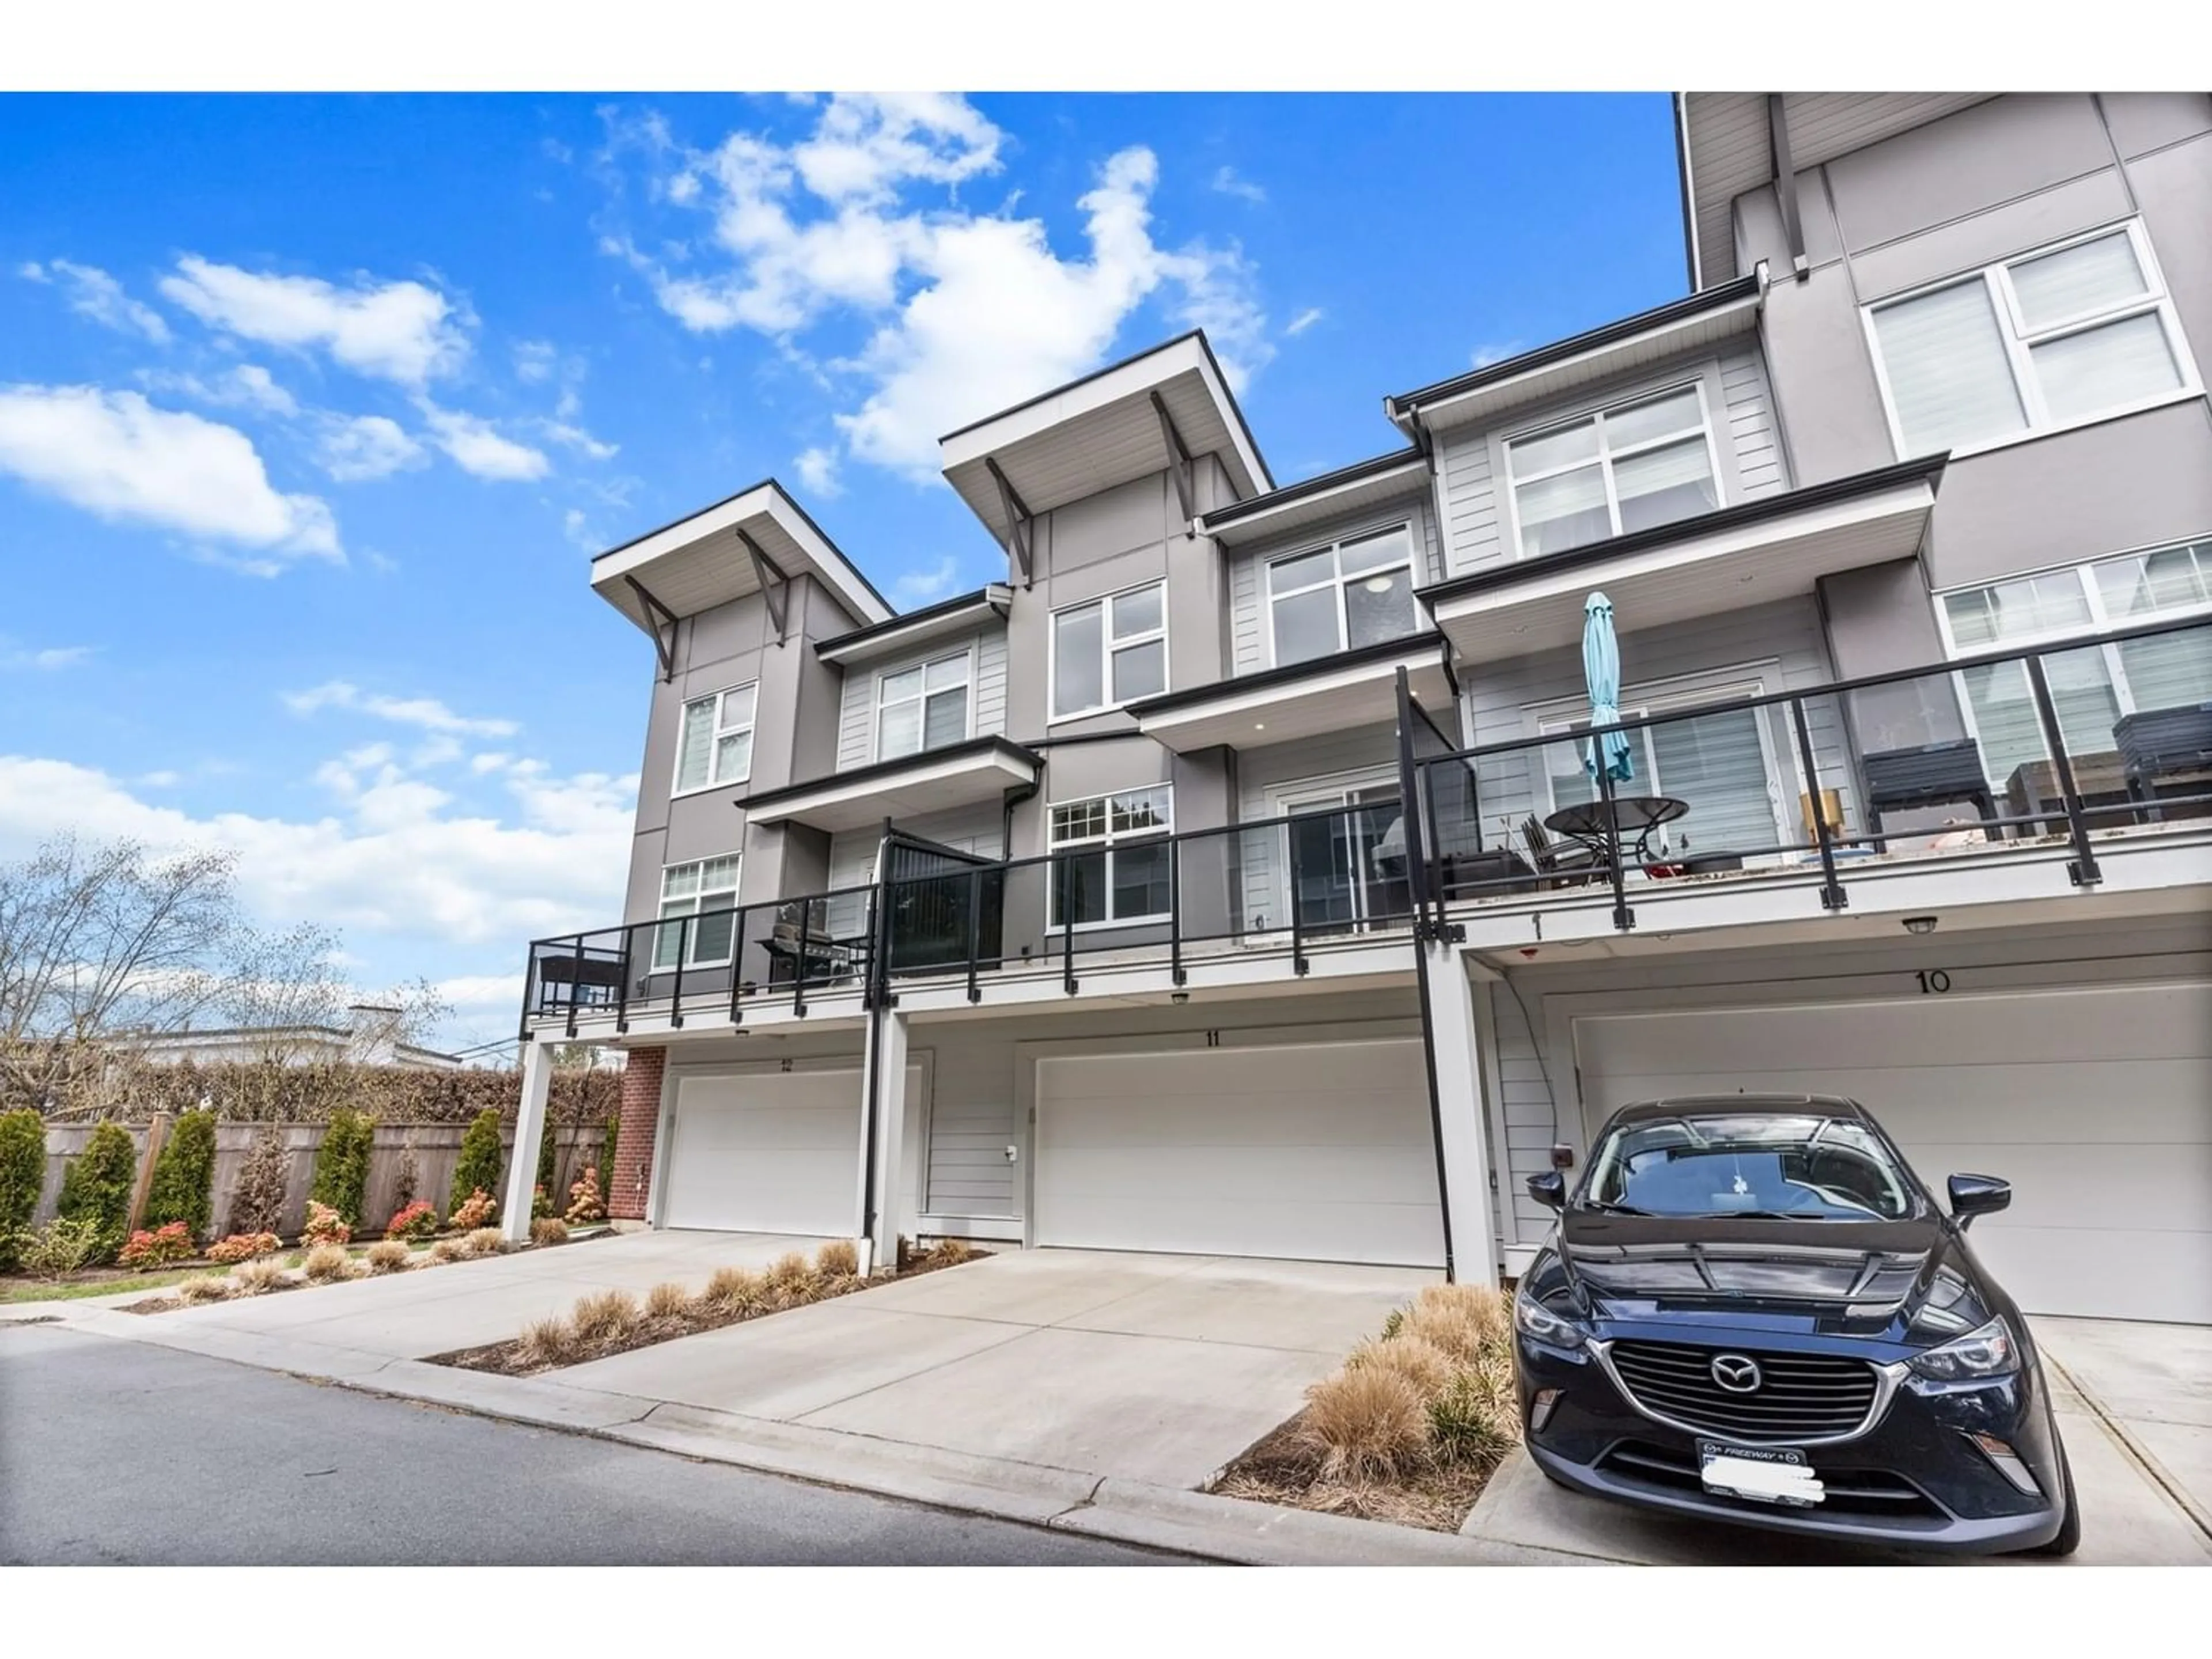 A pic from exterior of the house or condo for 11 22334 48 AVENUE, Langley British Columbia V3A3N5